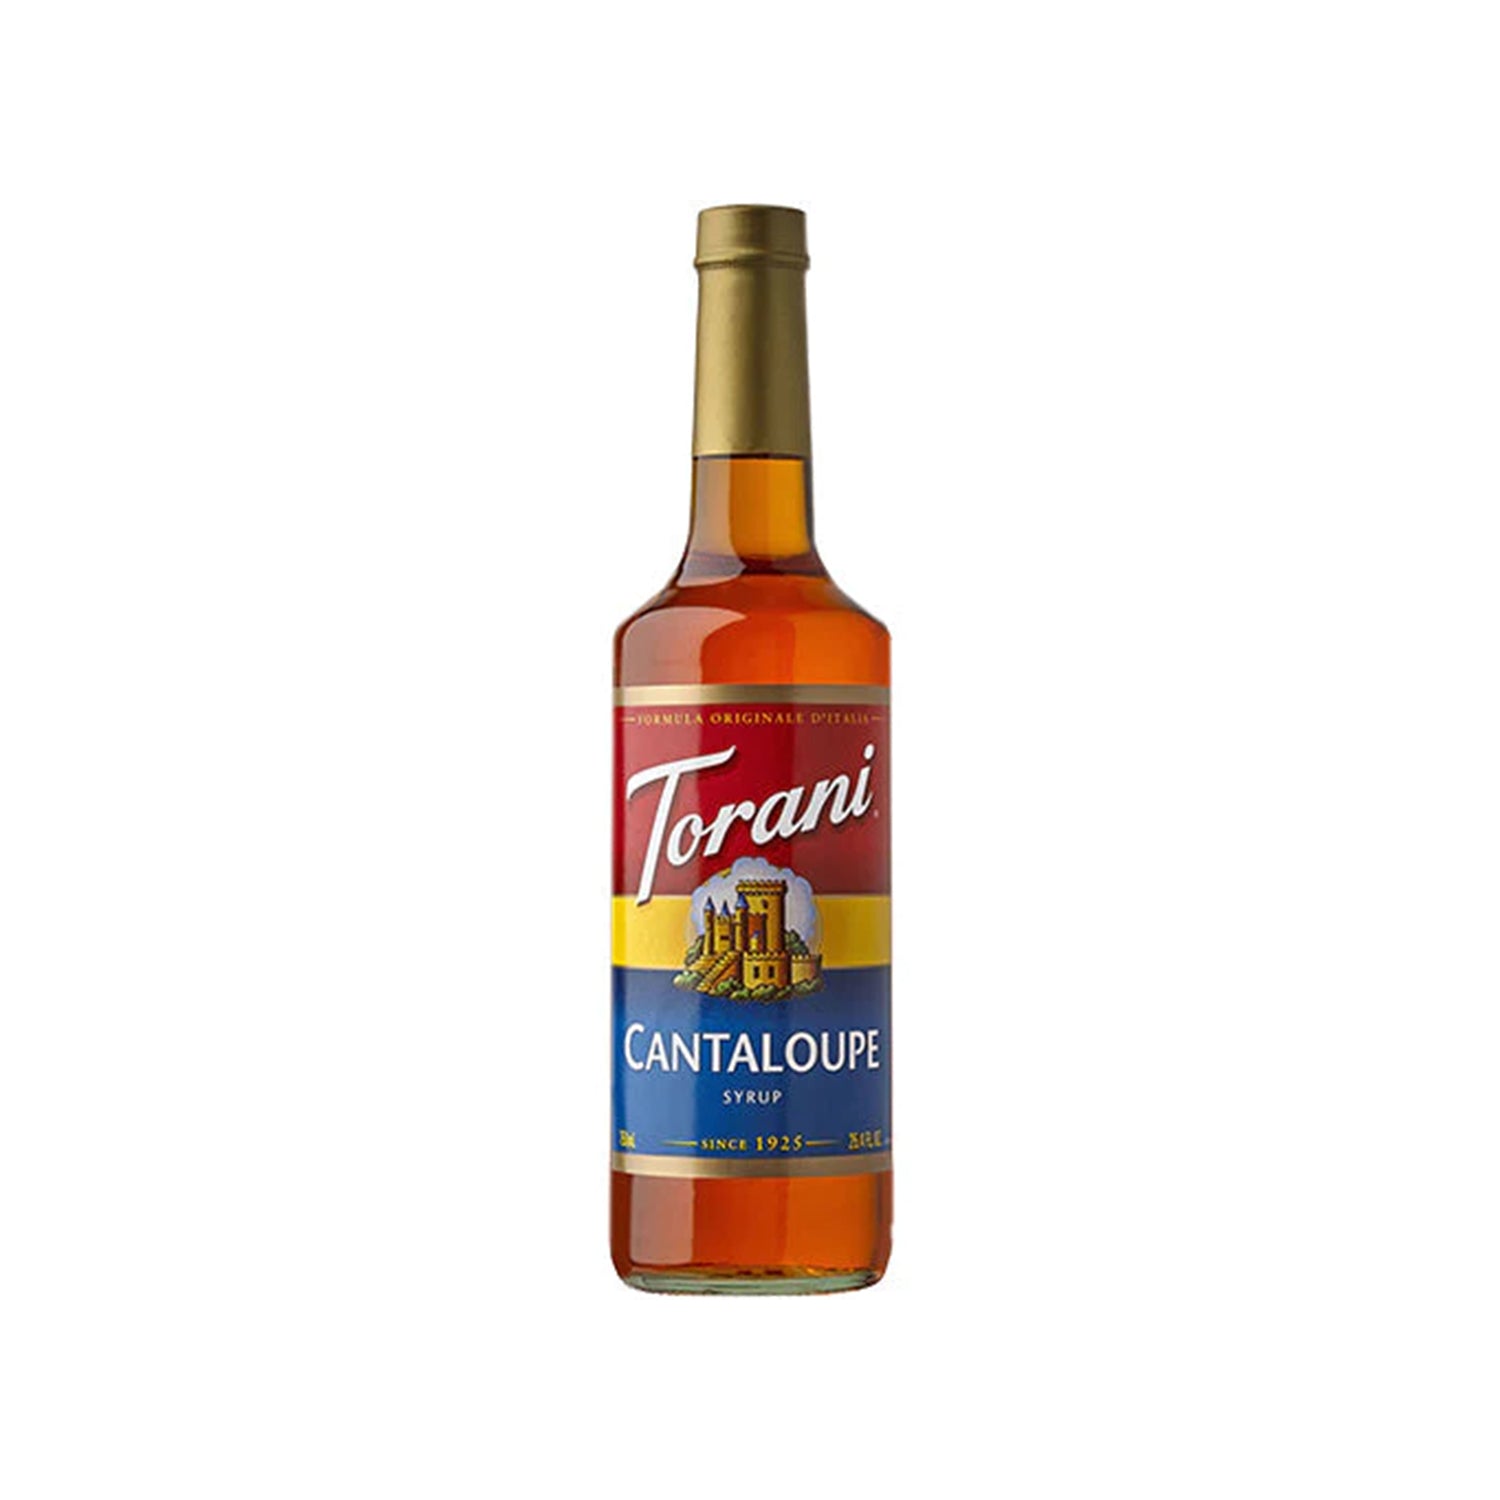 Torani Cantaloupe Syrup in clear 750mL bottle